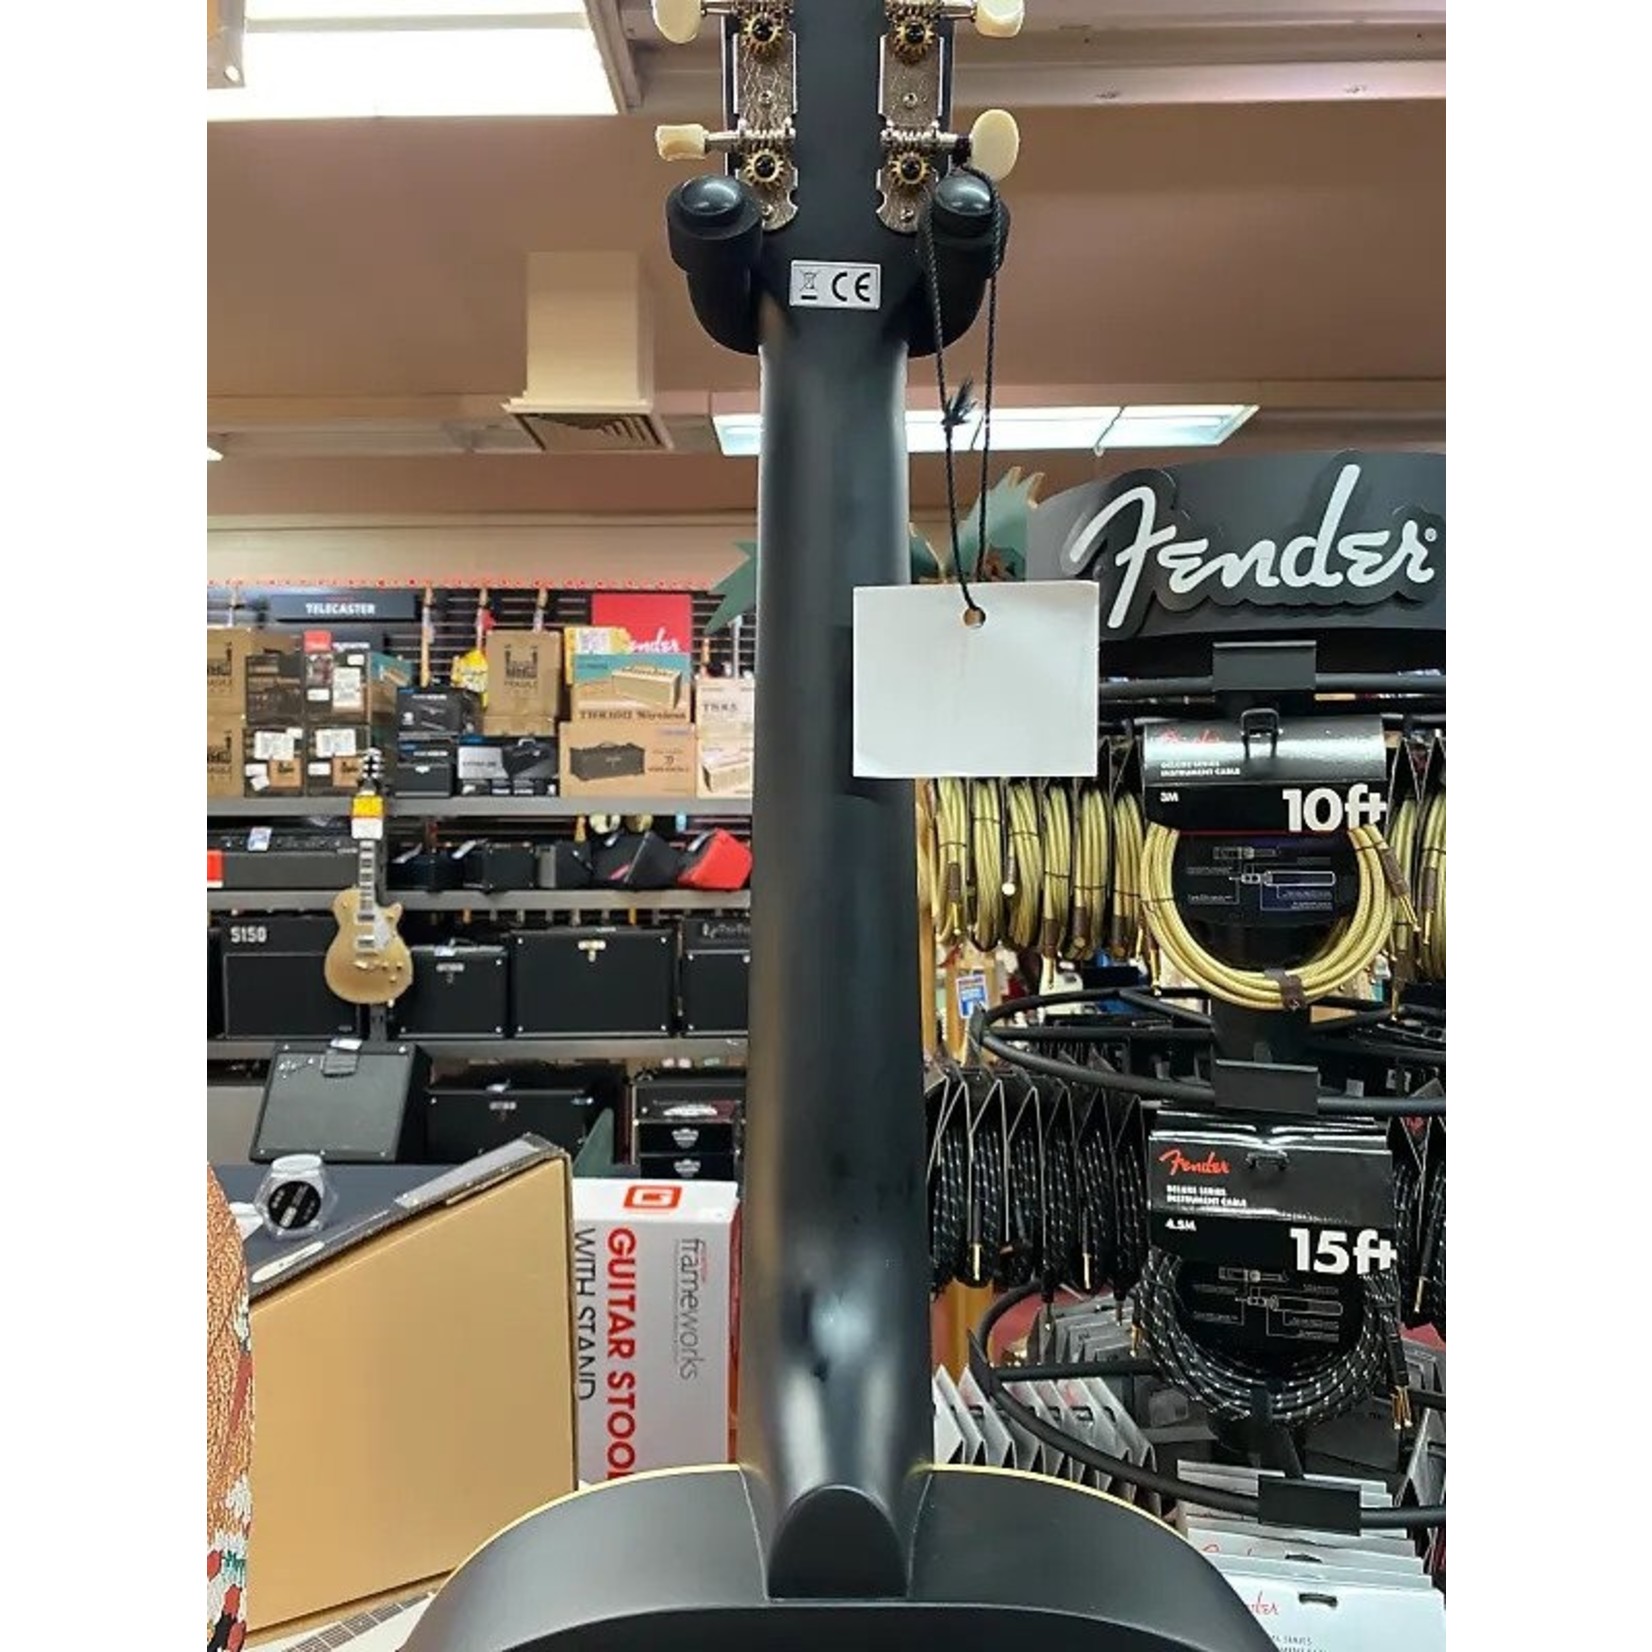 Gretsch Gretsch G9520E Gin Rickey Acoustic/Electric with Soundhole Pickup, Smokestack Black